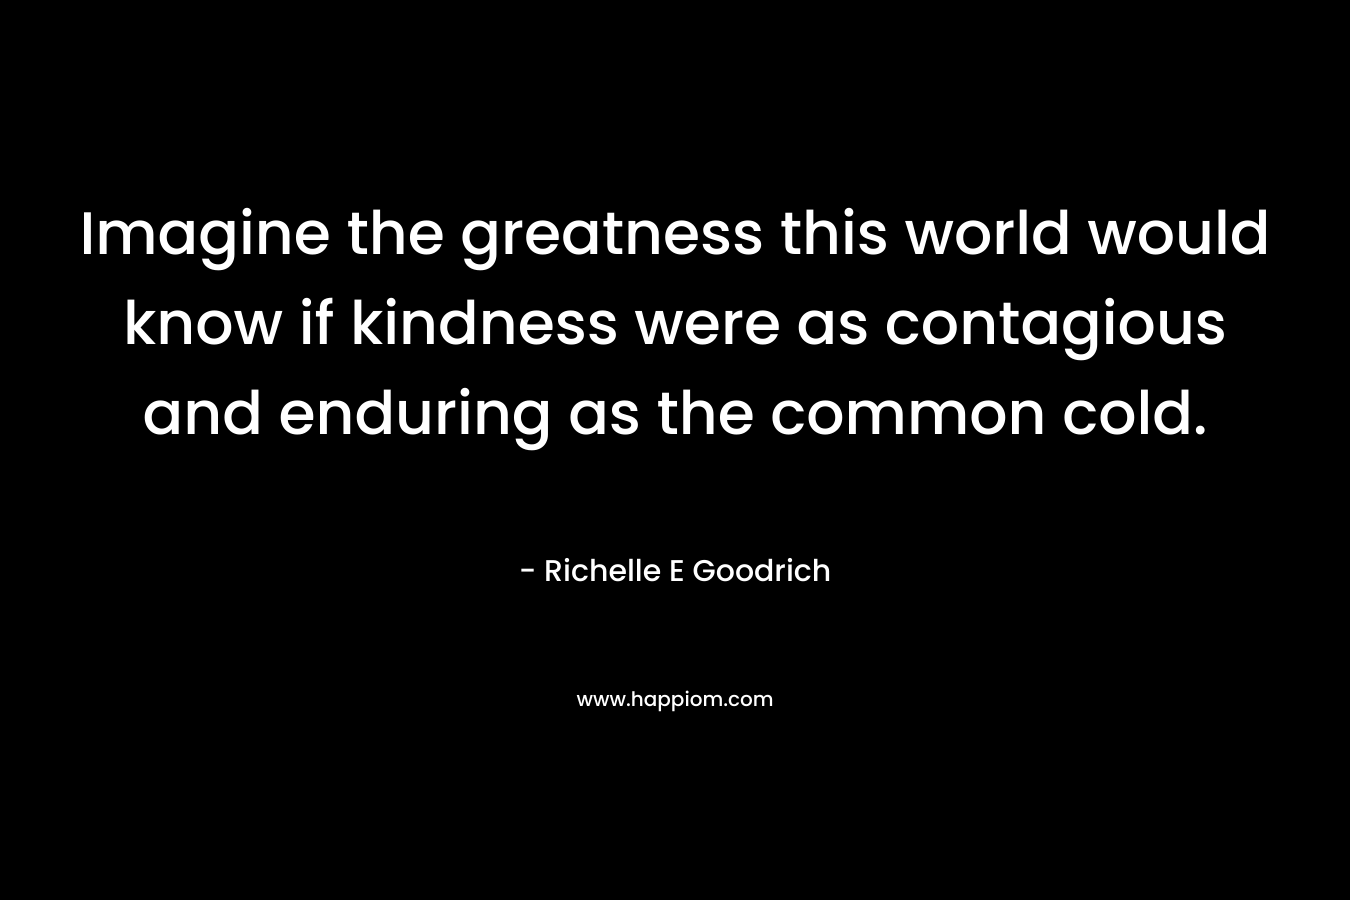 Imagine the greatness this world would know if kindness were as contagious and enduring as the common cold.